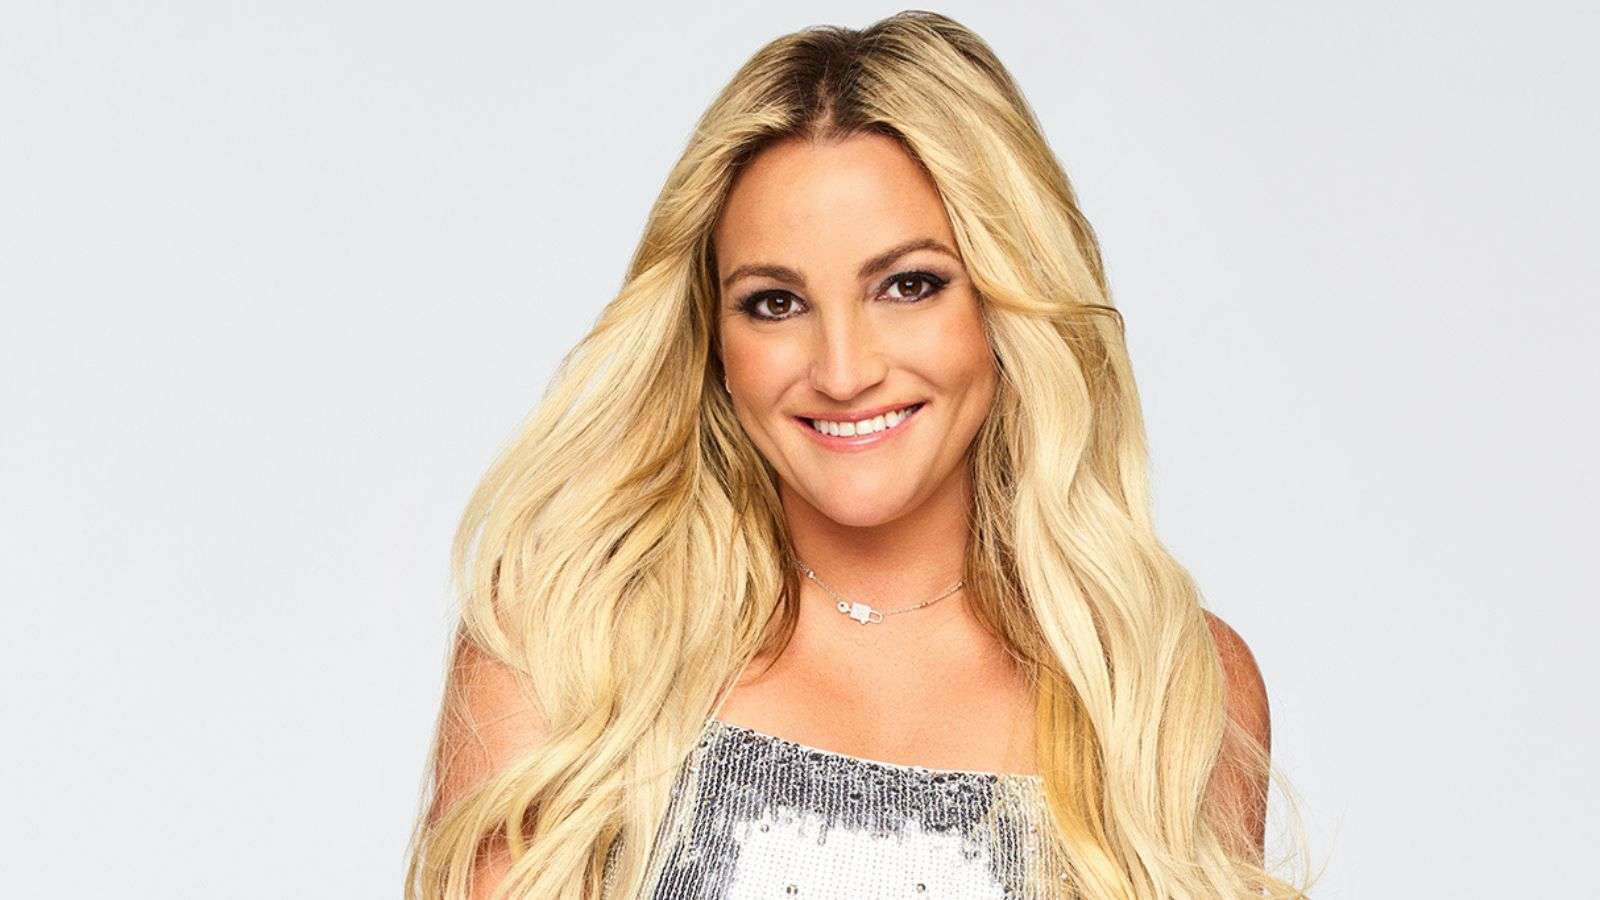 Jaime Lynn Spears from Dancing With The Stars